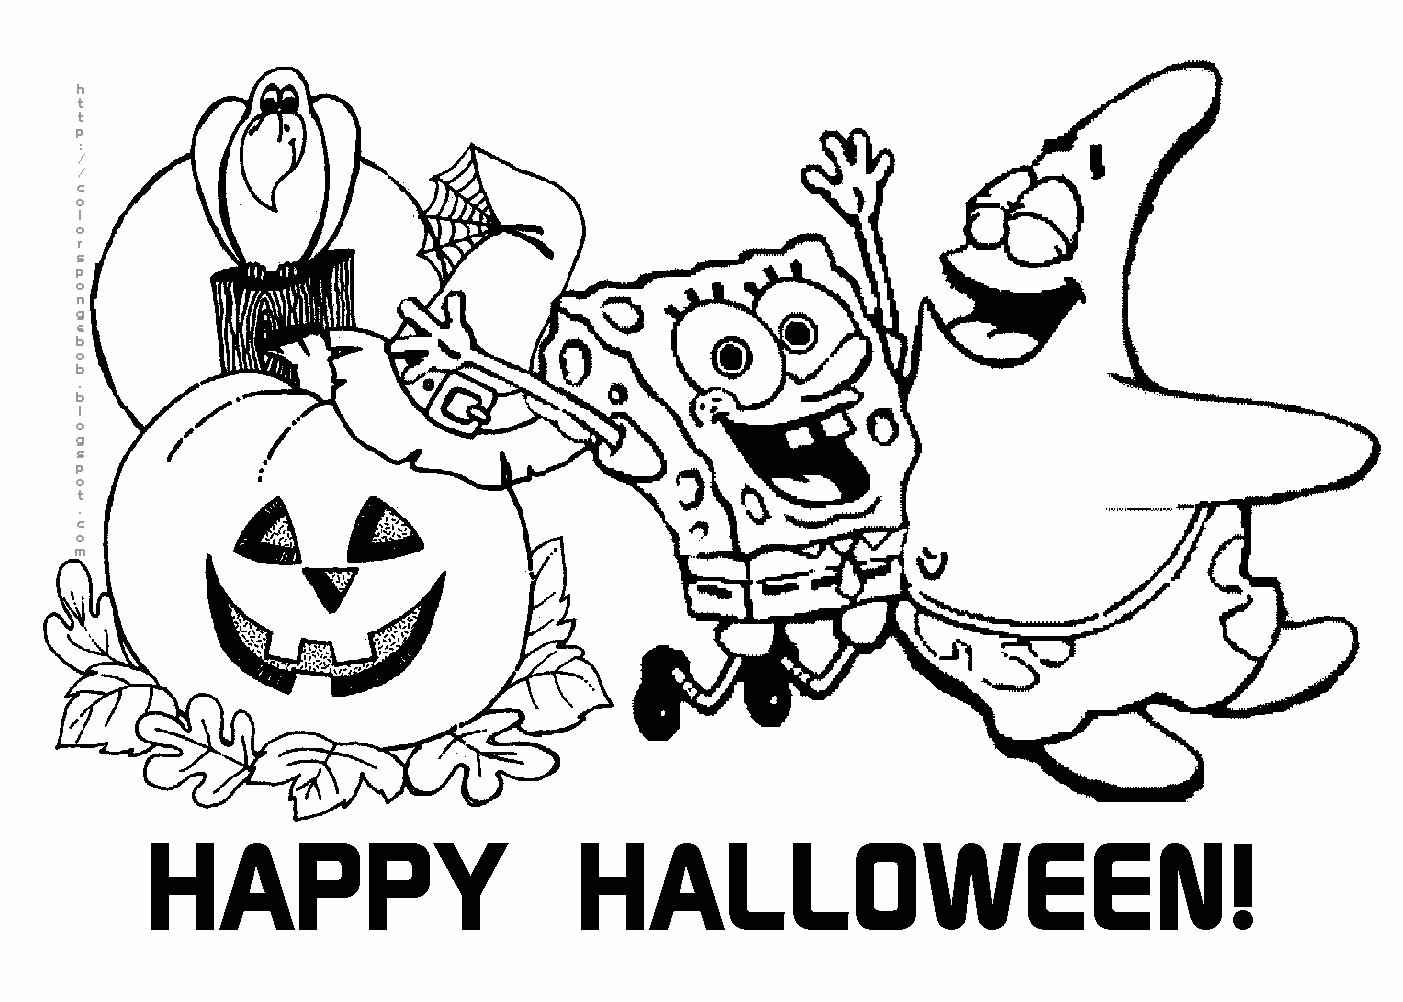 Cartoon Halloween Coloring Pages To Print - Coloring Pages For All